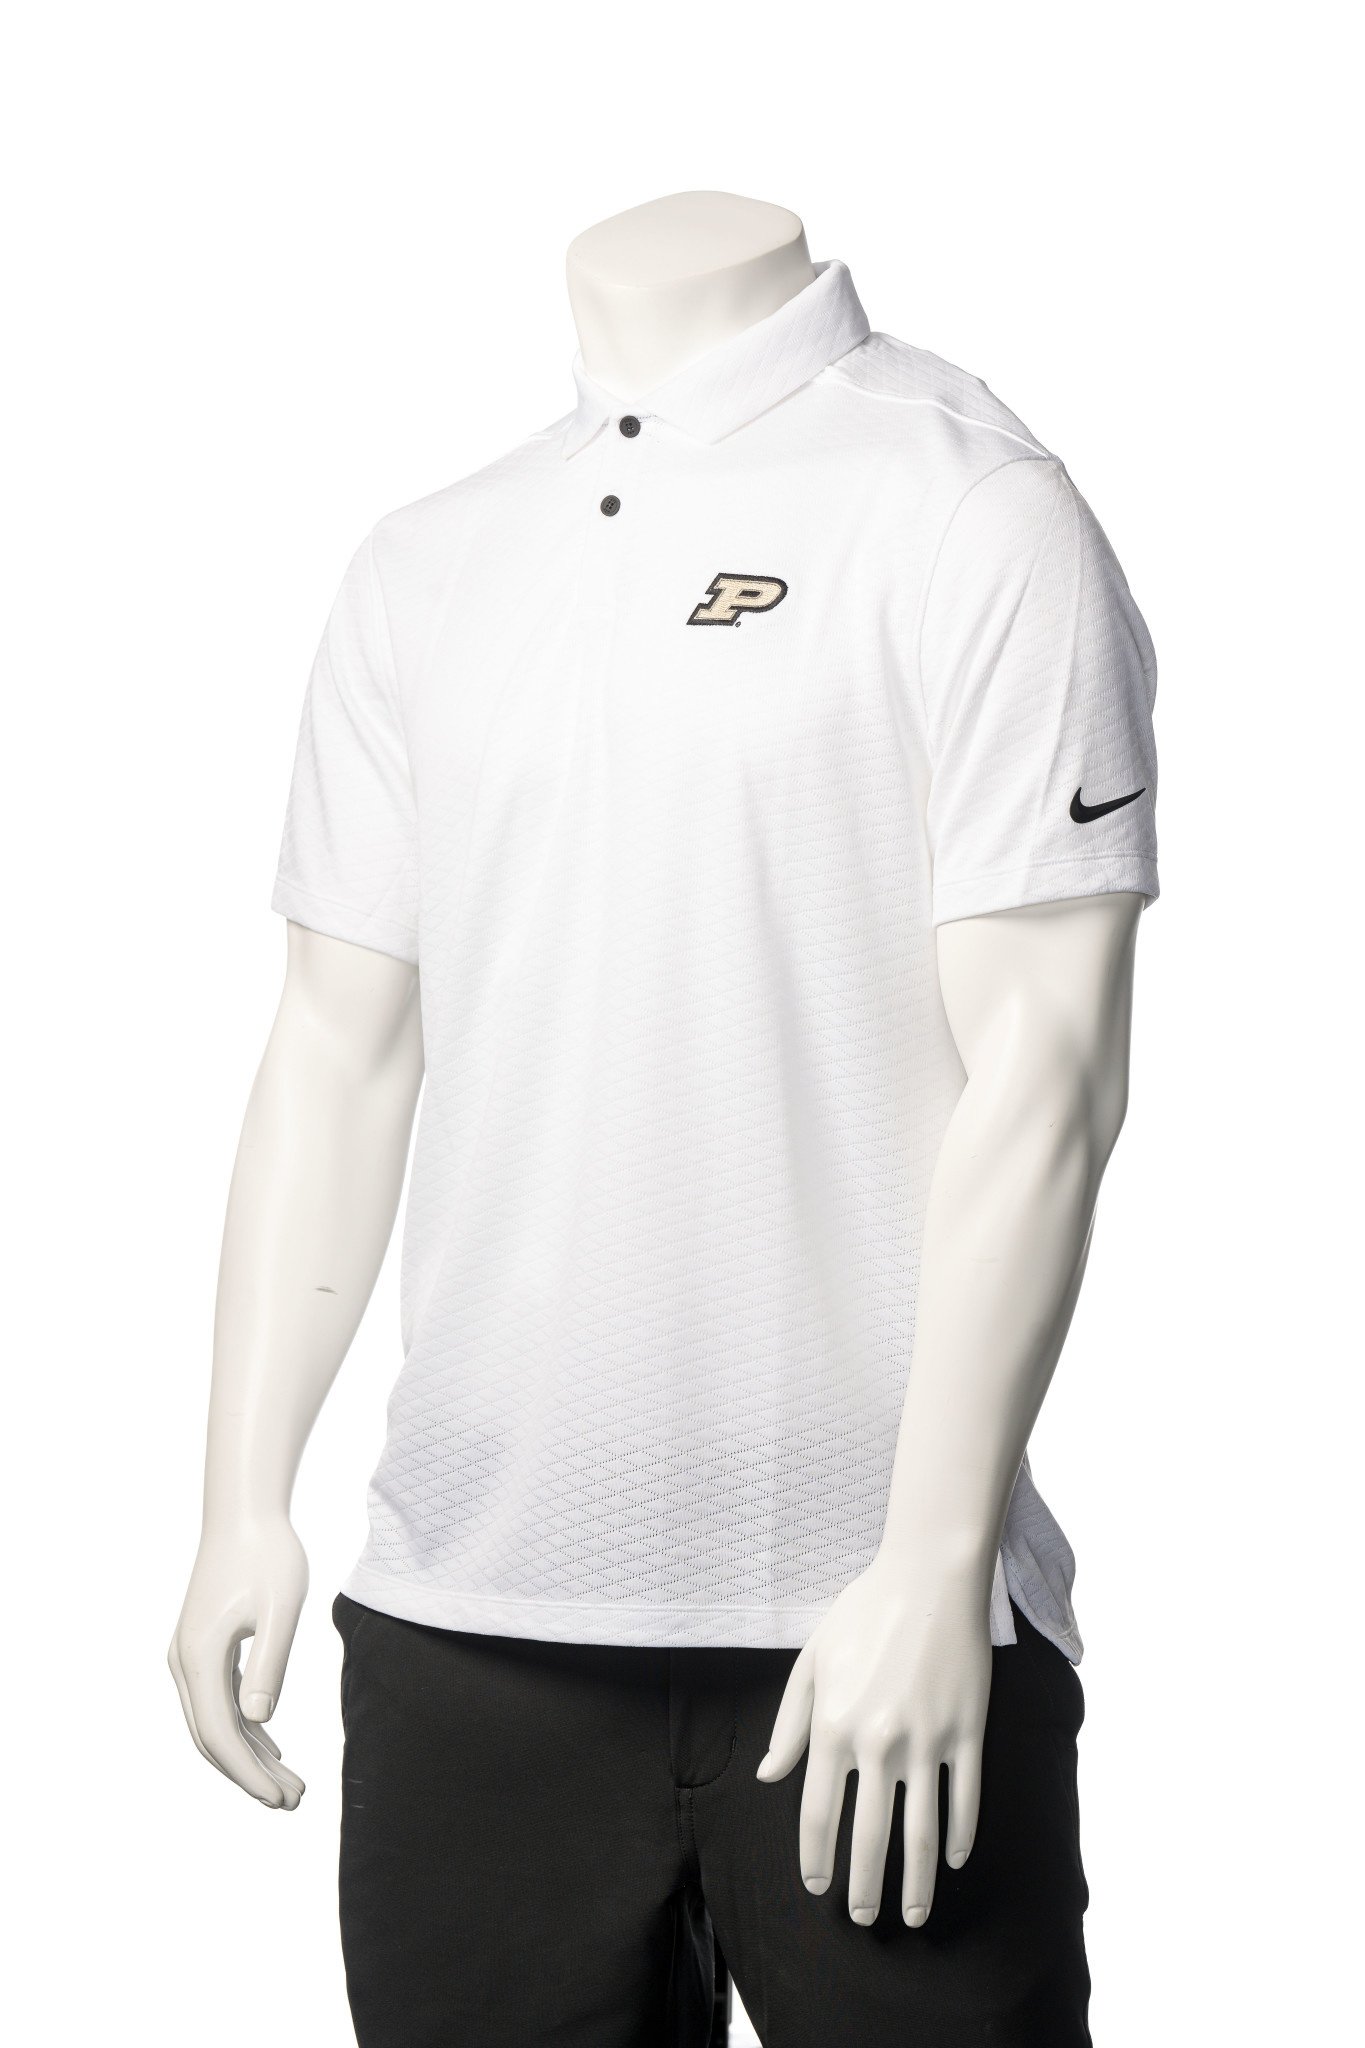 Overgivelse whisky trone NIKE NIKE DH0814 DRI-FIT VAPOR TEXTURE POLO - Birck Boilermaker Golf Complex